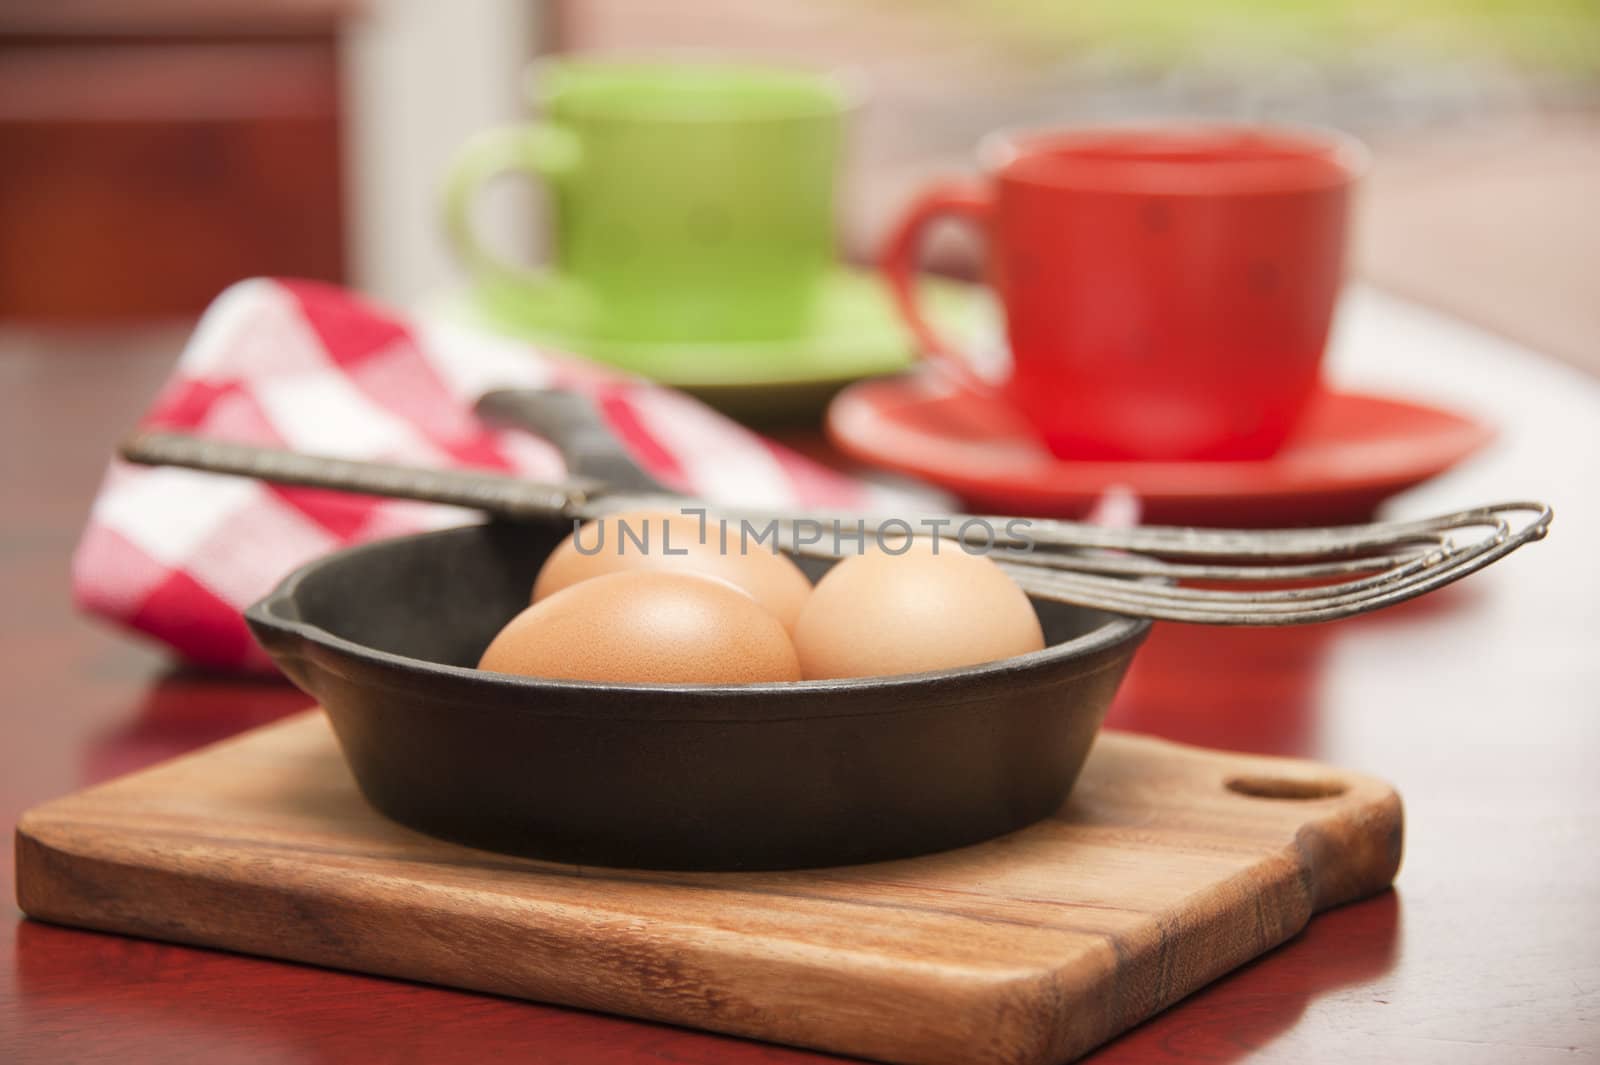 Three whole eggs in a skillet to be prepared for breakfast.